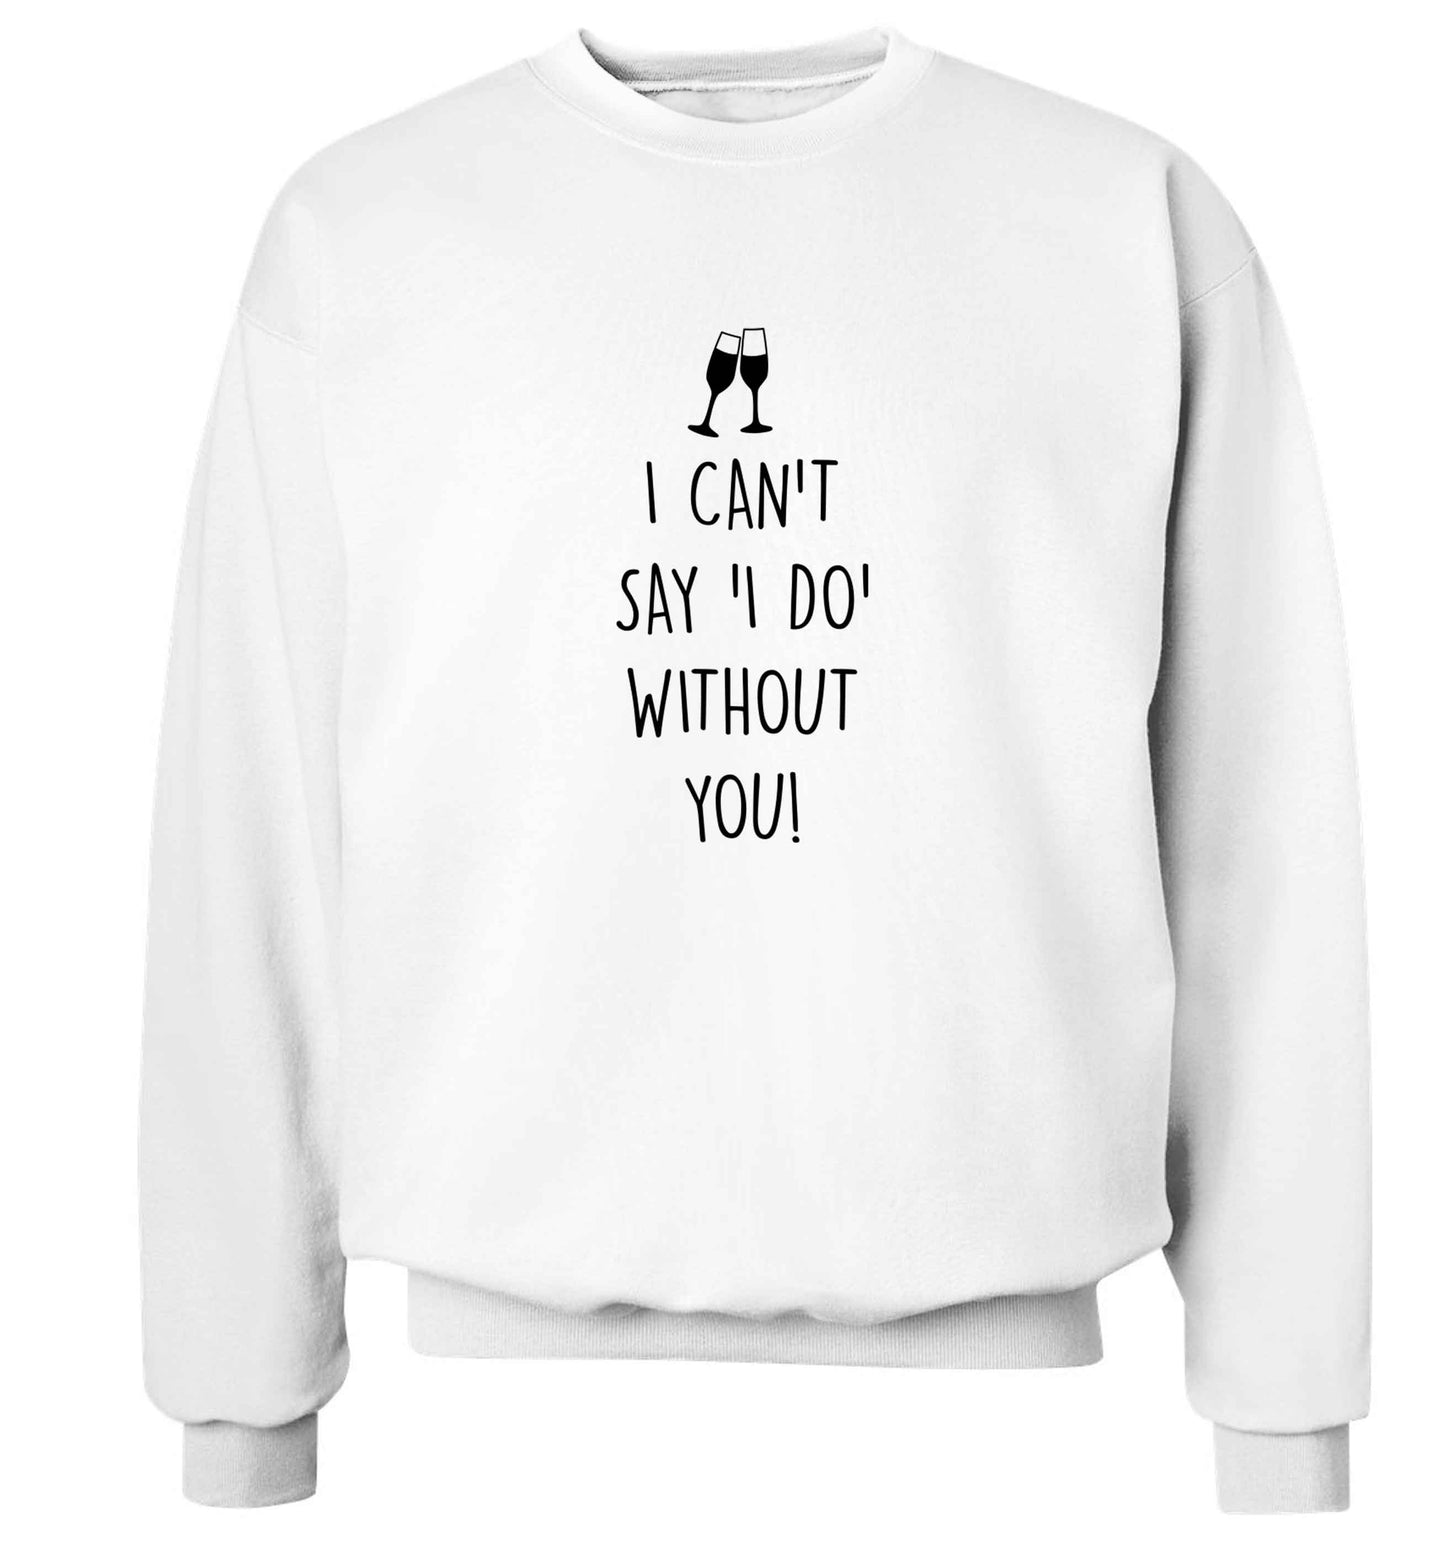 I can't say 'I do' without you! adult's unisex white sweater 2XL